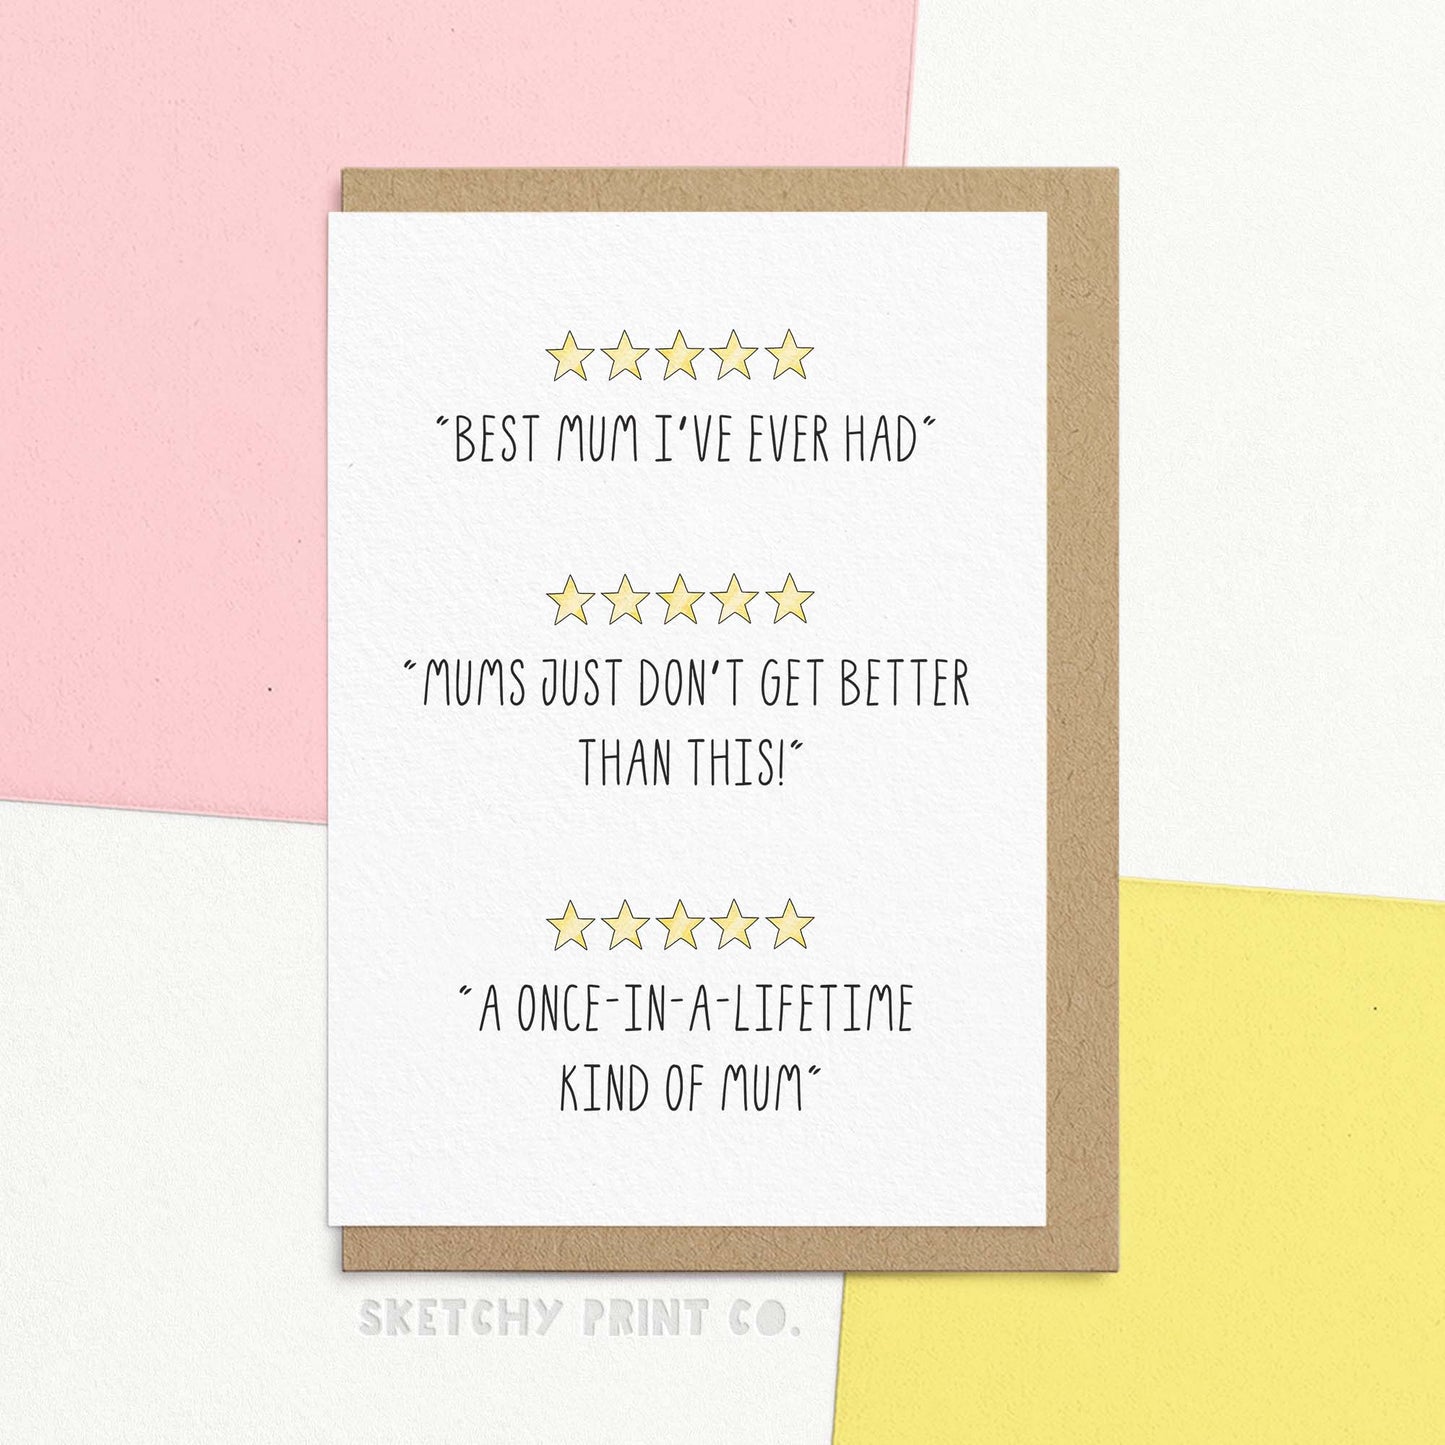 Funny Mother’s Day Card for Mum Gift for Mom Mothers Day Ideas for Mum. Card has 3 5 star reviews reading "Best Mum I've Ever Had", "Mums just don't get better than this!" and "a once-in-a-lifetime kind of mum" Send funny happy mothers day messages from sketchy print co!